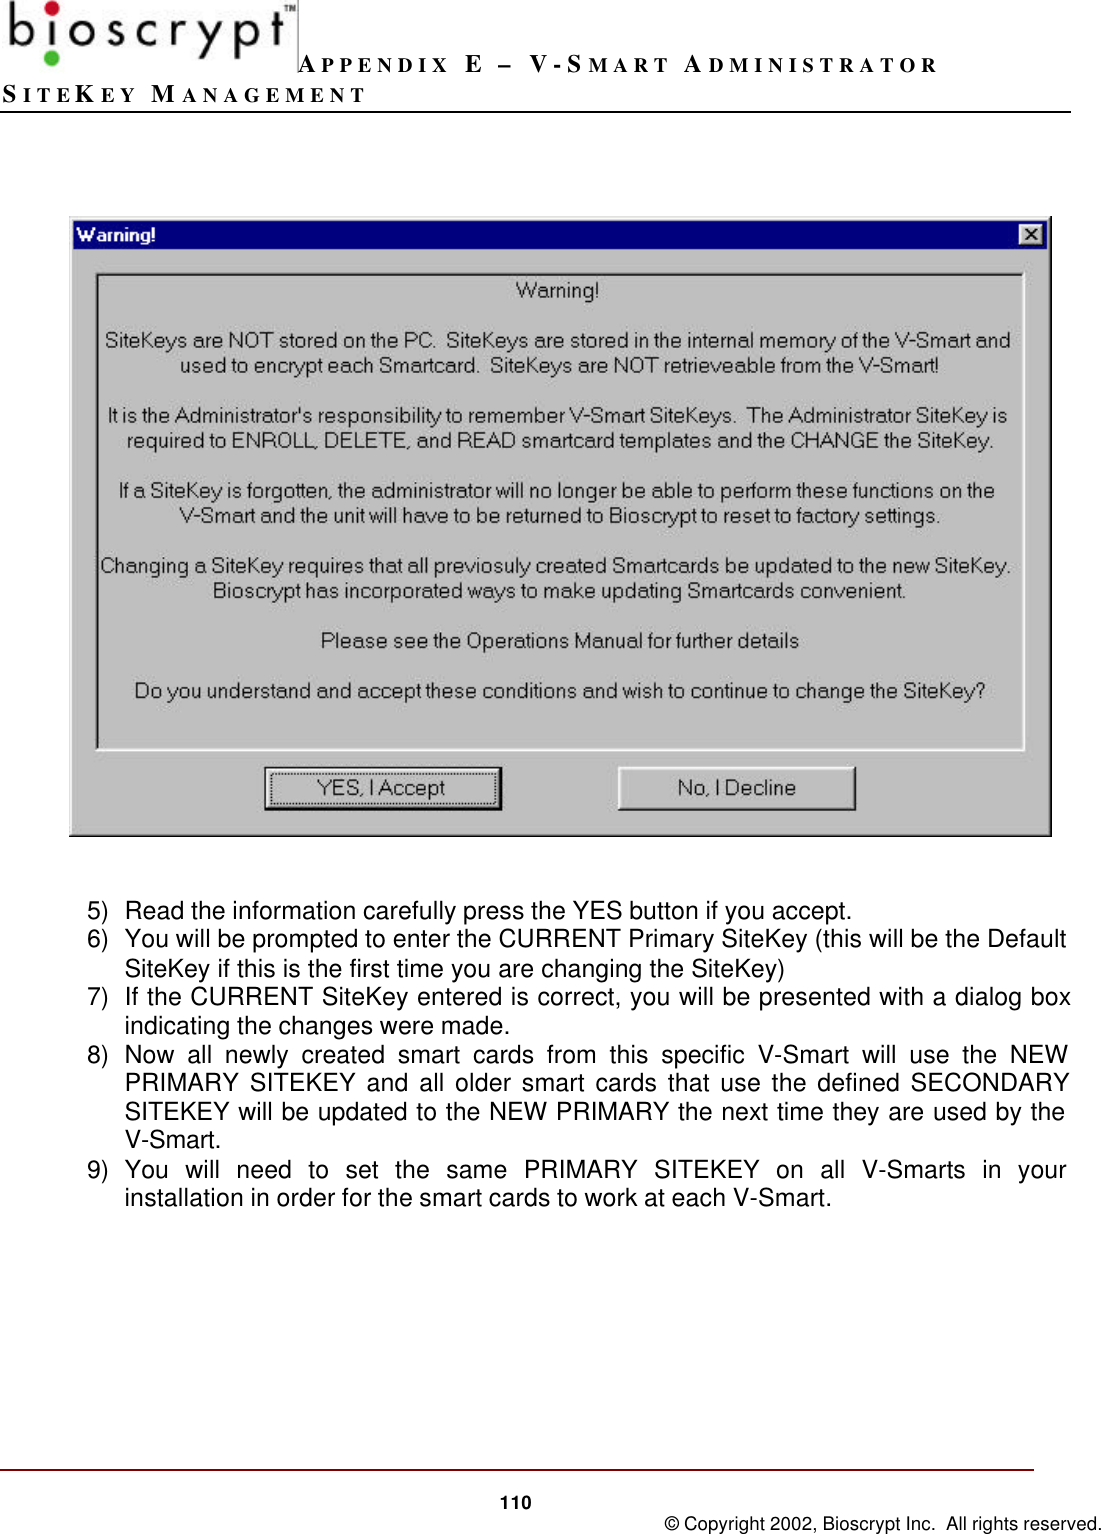 APPENDIX E – V-SMART ADMINISTRATORSITEKEY MANAGEMENT110 © Copyright 2002, Bioscrypt Inc.  All rights reserved.5) Read the information carefully press the YES button if you accept.6) You will be prompted to enter the CURRENT Primary SiteKey (this will be the DefaultSiteKey if this is the first time you are changing the SiteKey)7) If the CURRENT SiteKey entered is correct, you will be presented with a dialog boxindicating the changes were made.8) Now all newly created smart cards from this specific V-Smart will use the NEWPRIMARY SITEKEY and all older smart cards that use the defined SECONDARYSITEKEY will be updated to the NEW PRIMARY the next time they are used by theV-Smart.9) You will need to set the same PRIMARY SITEKEY on all V-Smarts in yourinstallation in order for the smart cards to work at each V-Smart.